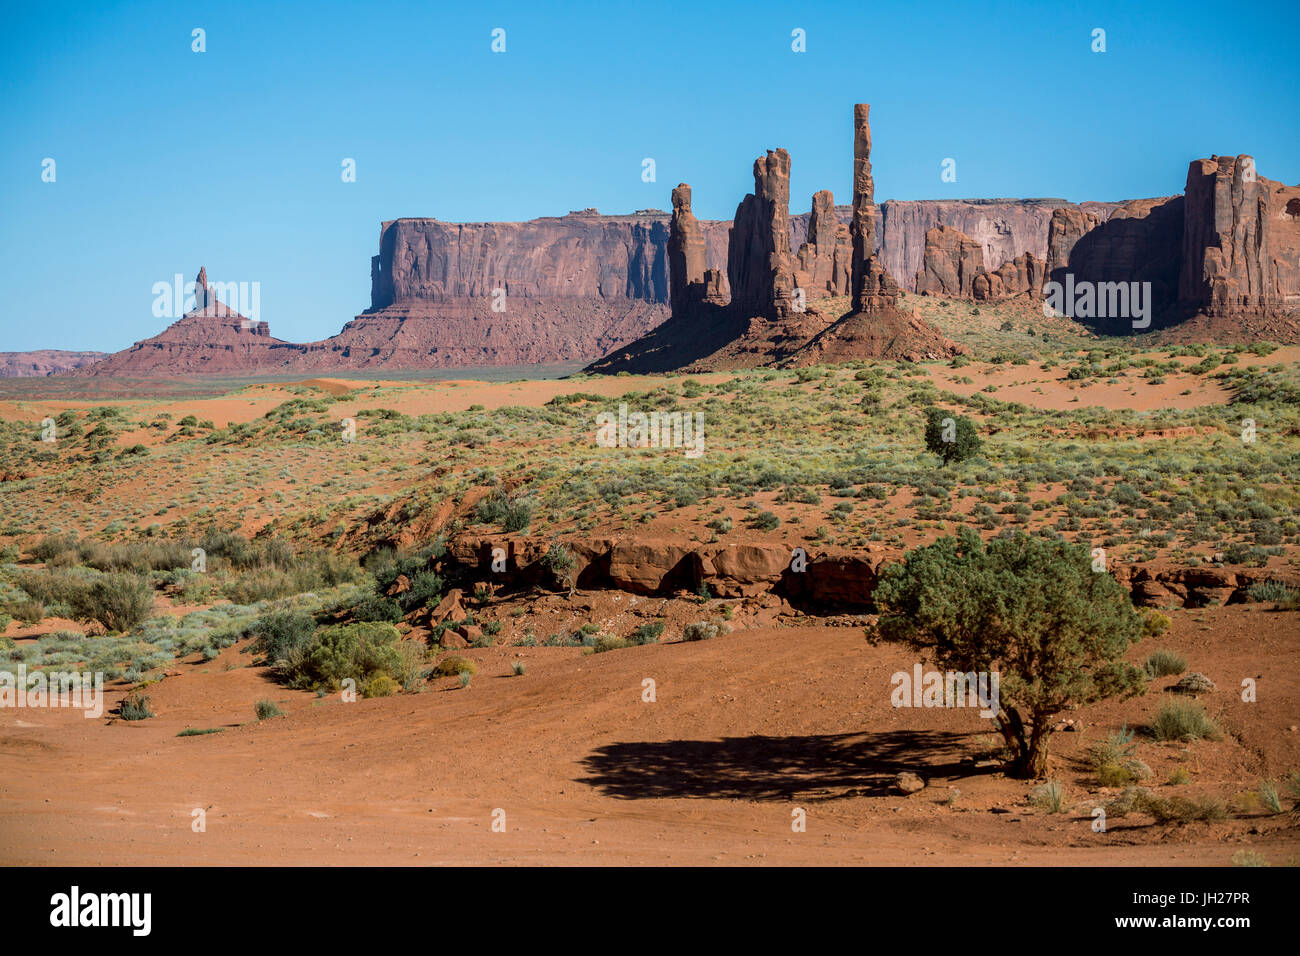 Rock formations, Monument Valley, Navajo Tribal Park, Arizona, United States of America, North America Stock Photo